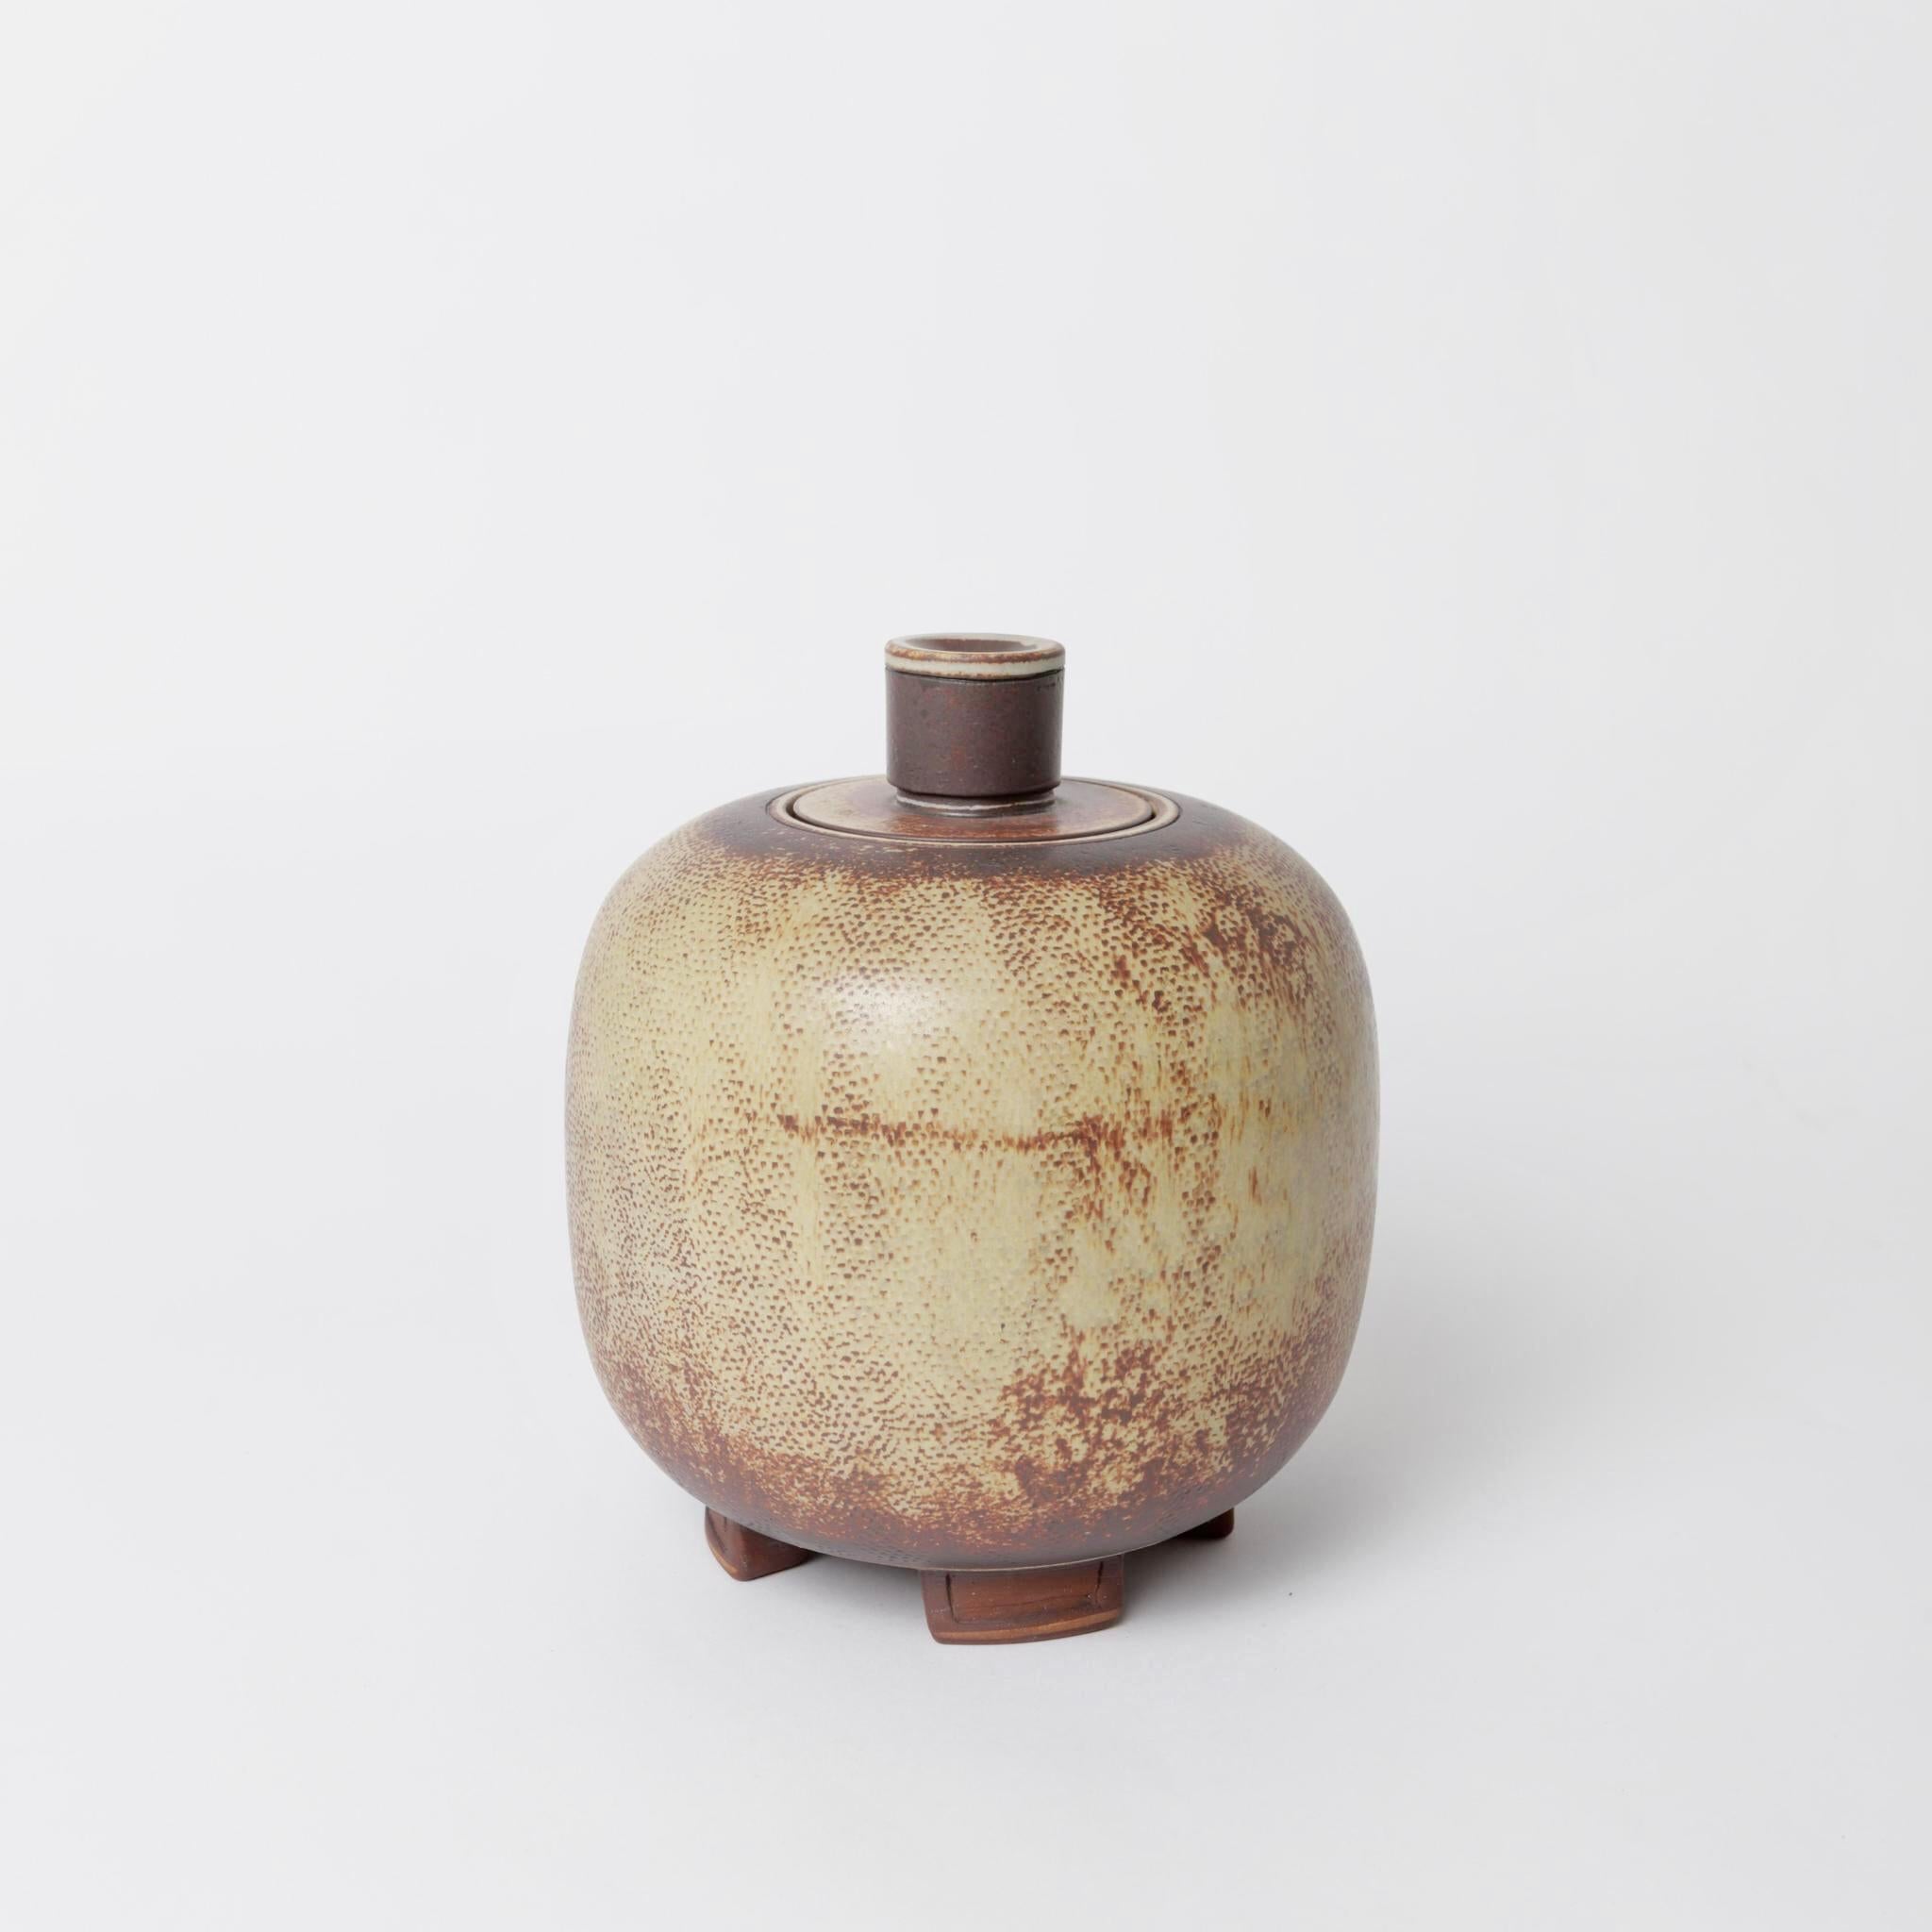 Farsta glazed stoneware lidded urn by artist Wilhem Kage for Gustavsberg in Sweden. Signed by the artist.
Wilhelm Kage’s Farsta set comprises his most exclusive pottery artwork. The fired Farsta pieces were dipped in a bath with metal oxides which